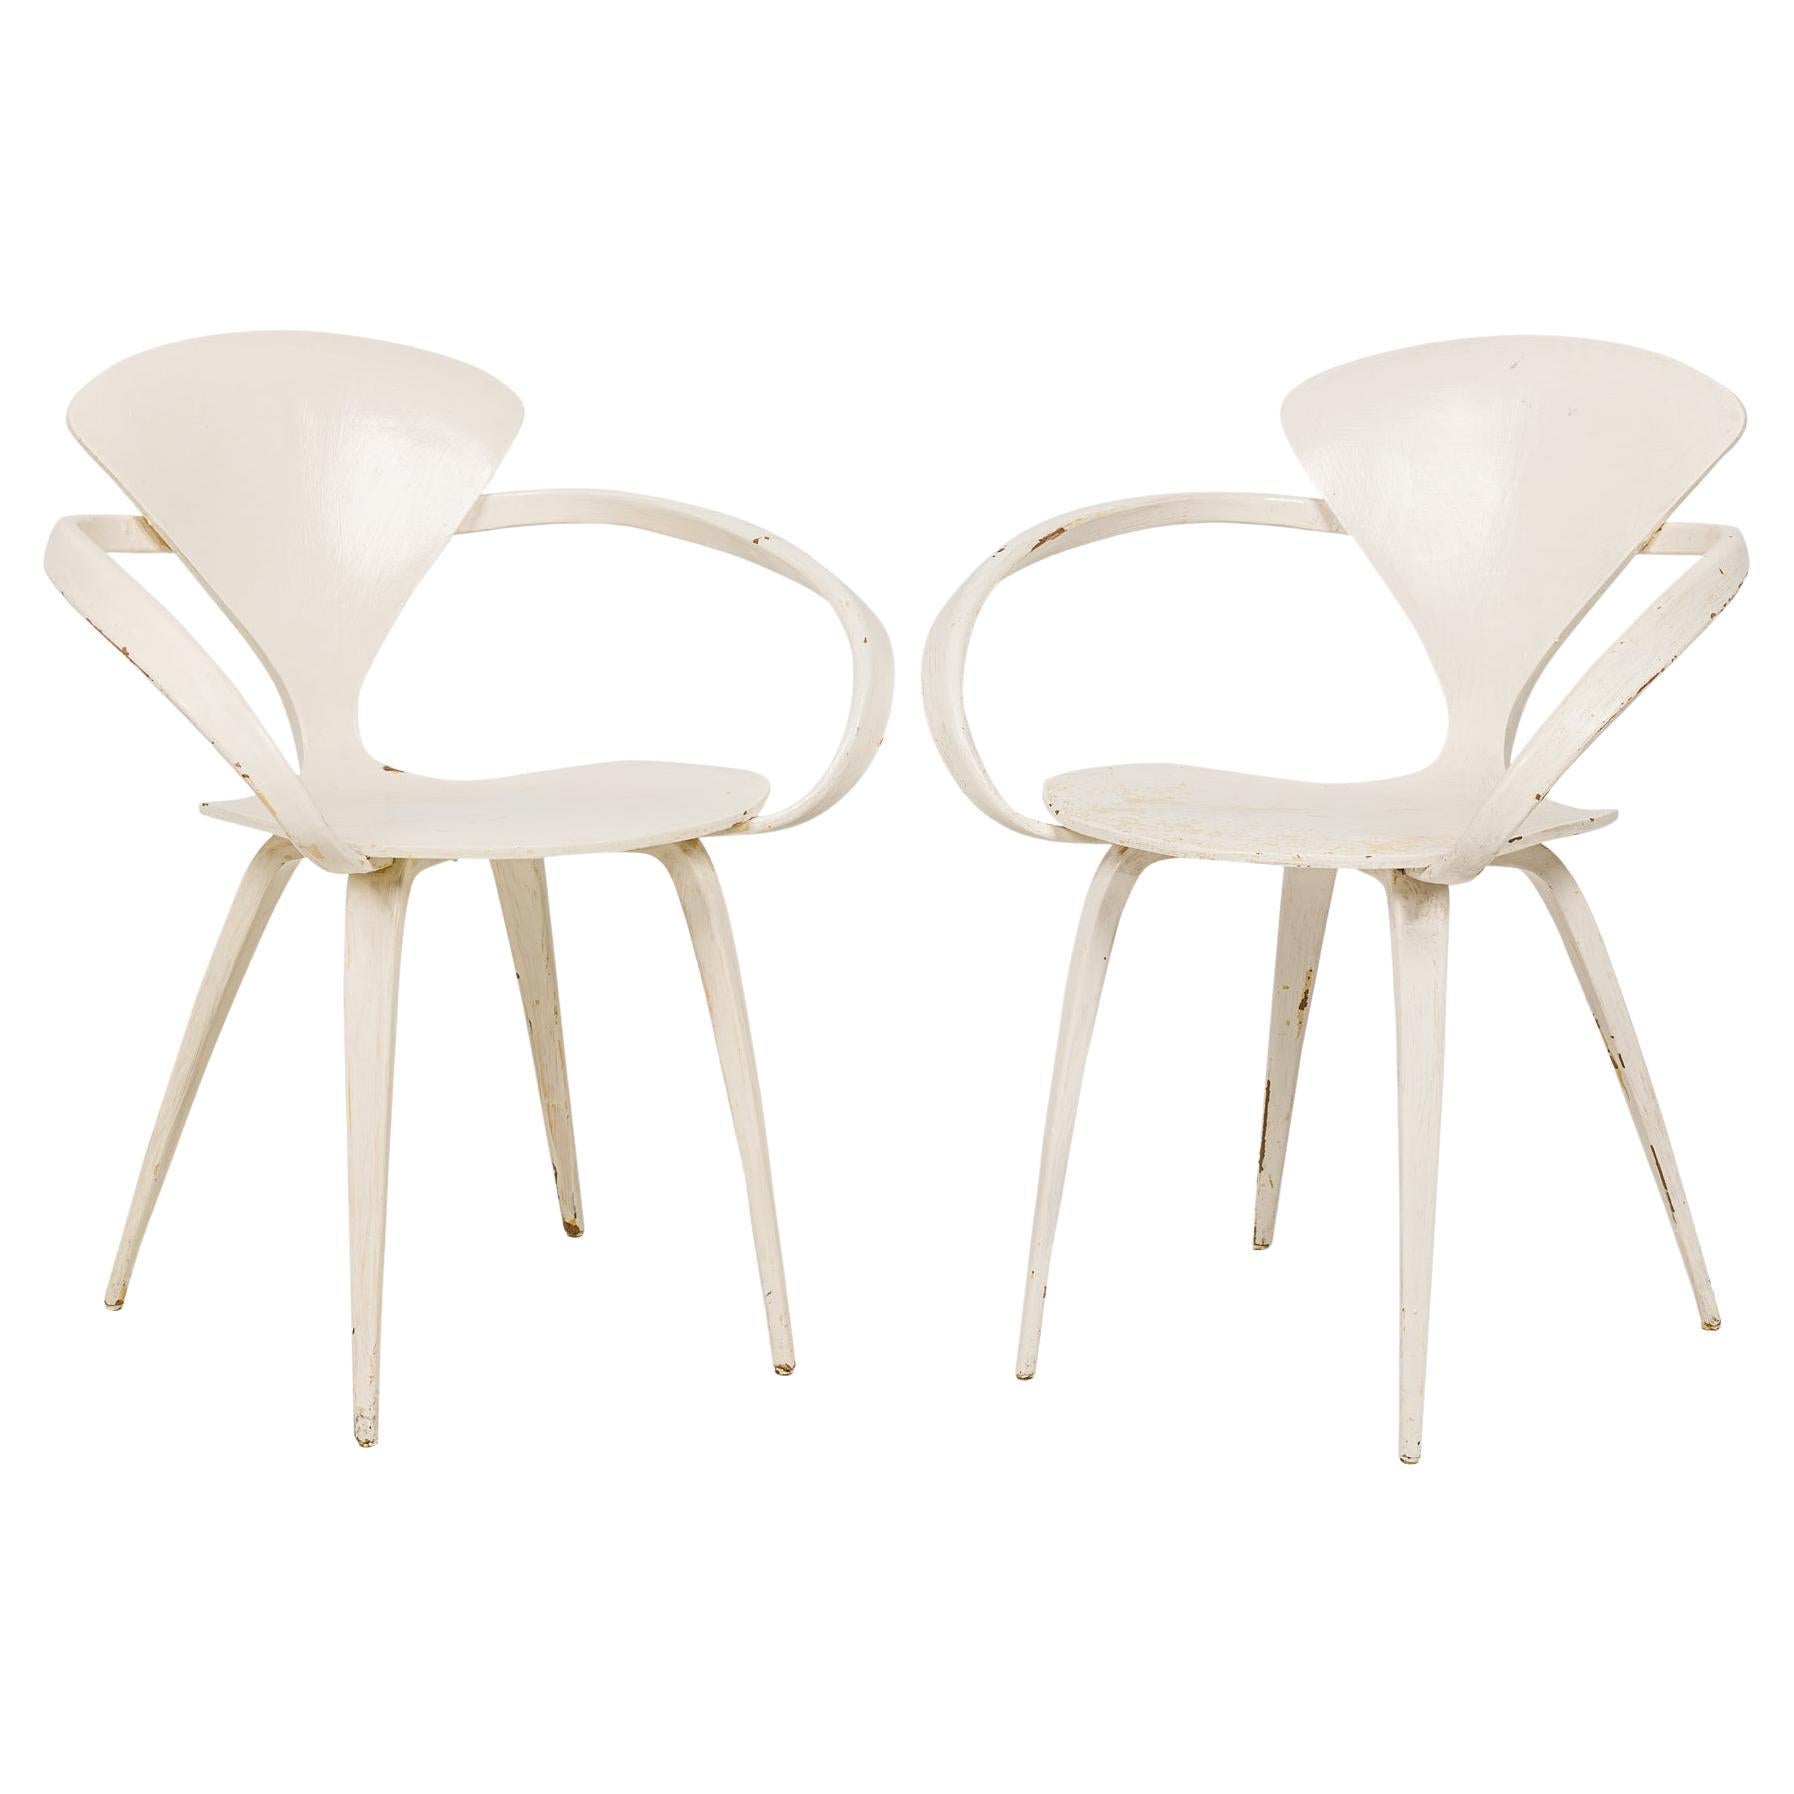 Pair of Norman Cherner for Plycraft White Bentwood 'Pretzel' Dining Chairs